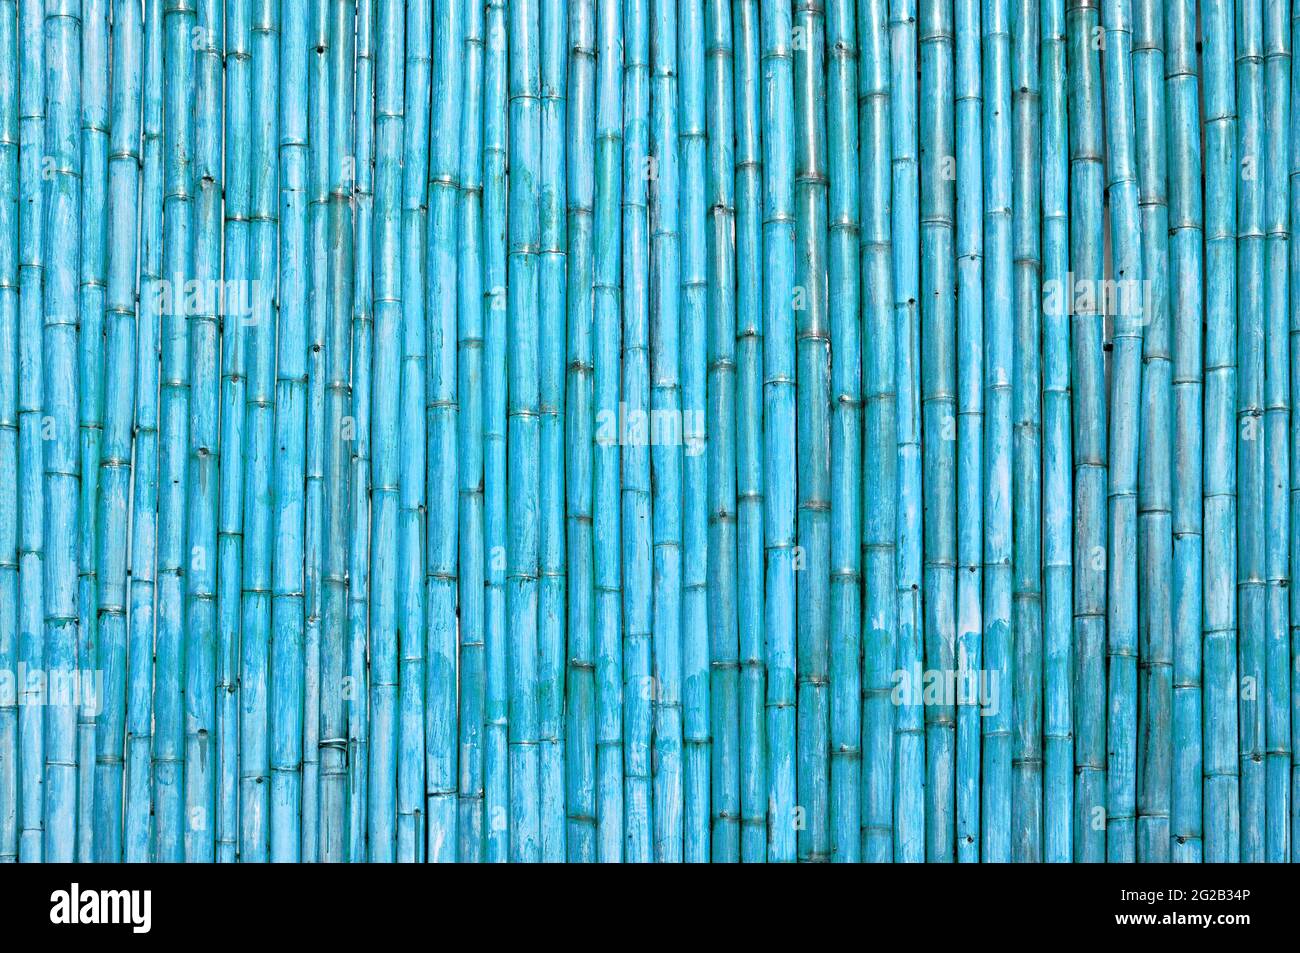 Blue bamboo wood abstract background Stock Photo